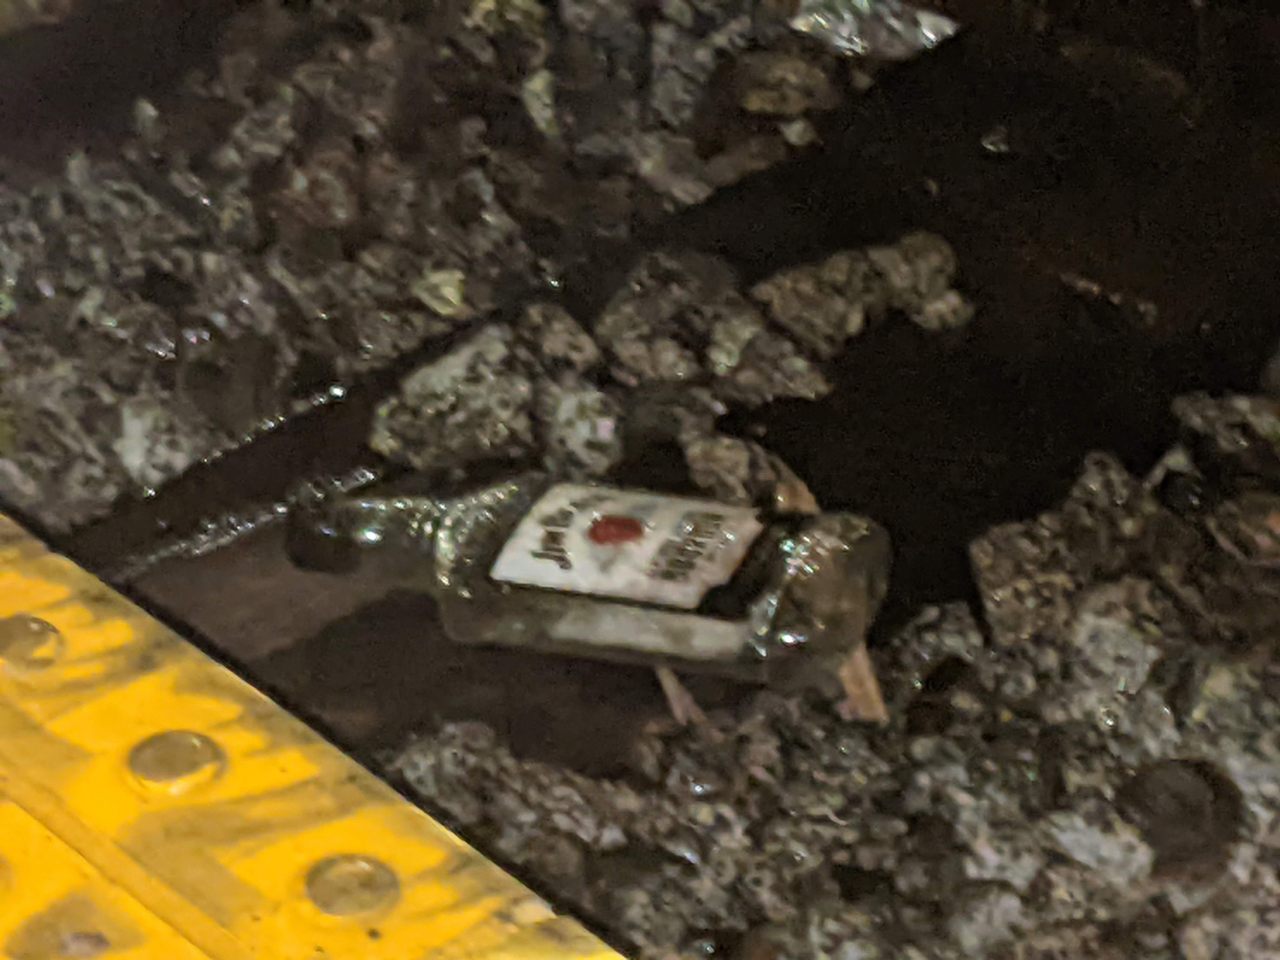 Perhaps it was already on the tracks, but somehow this seems related, right under the car.